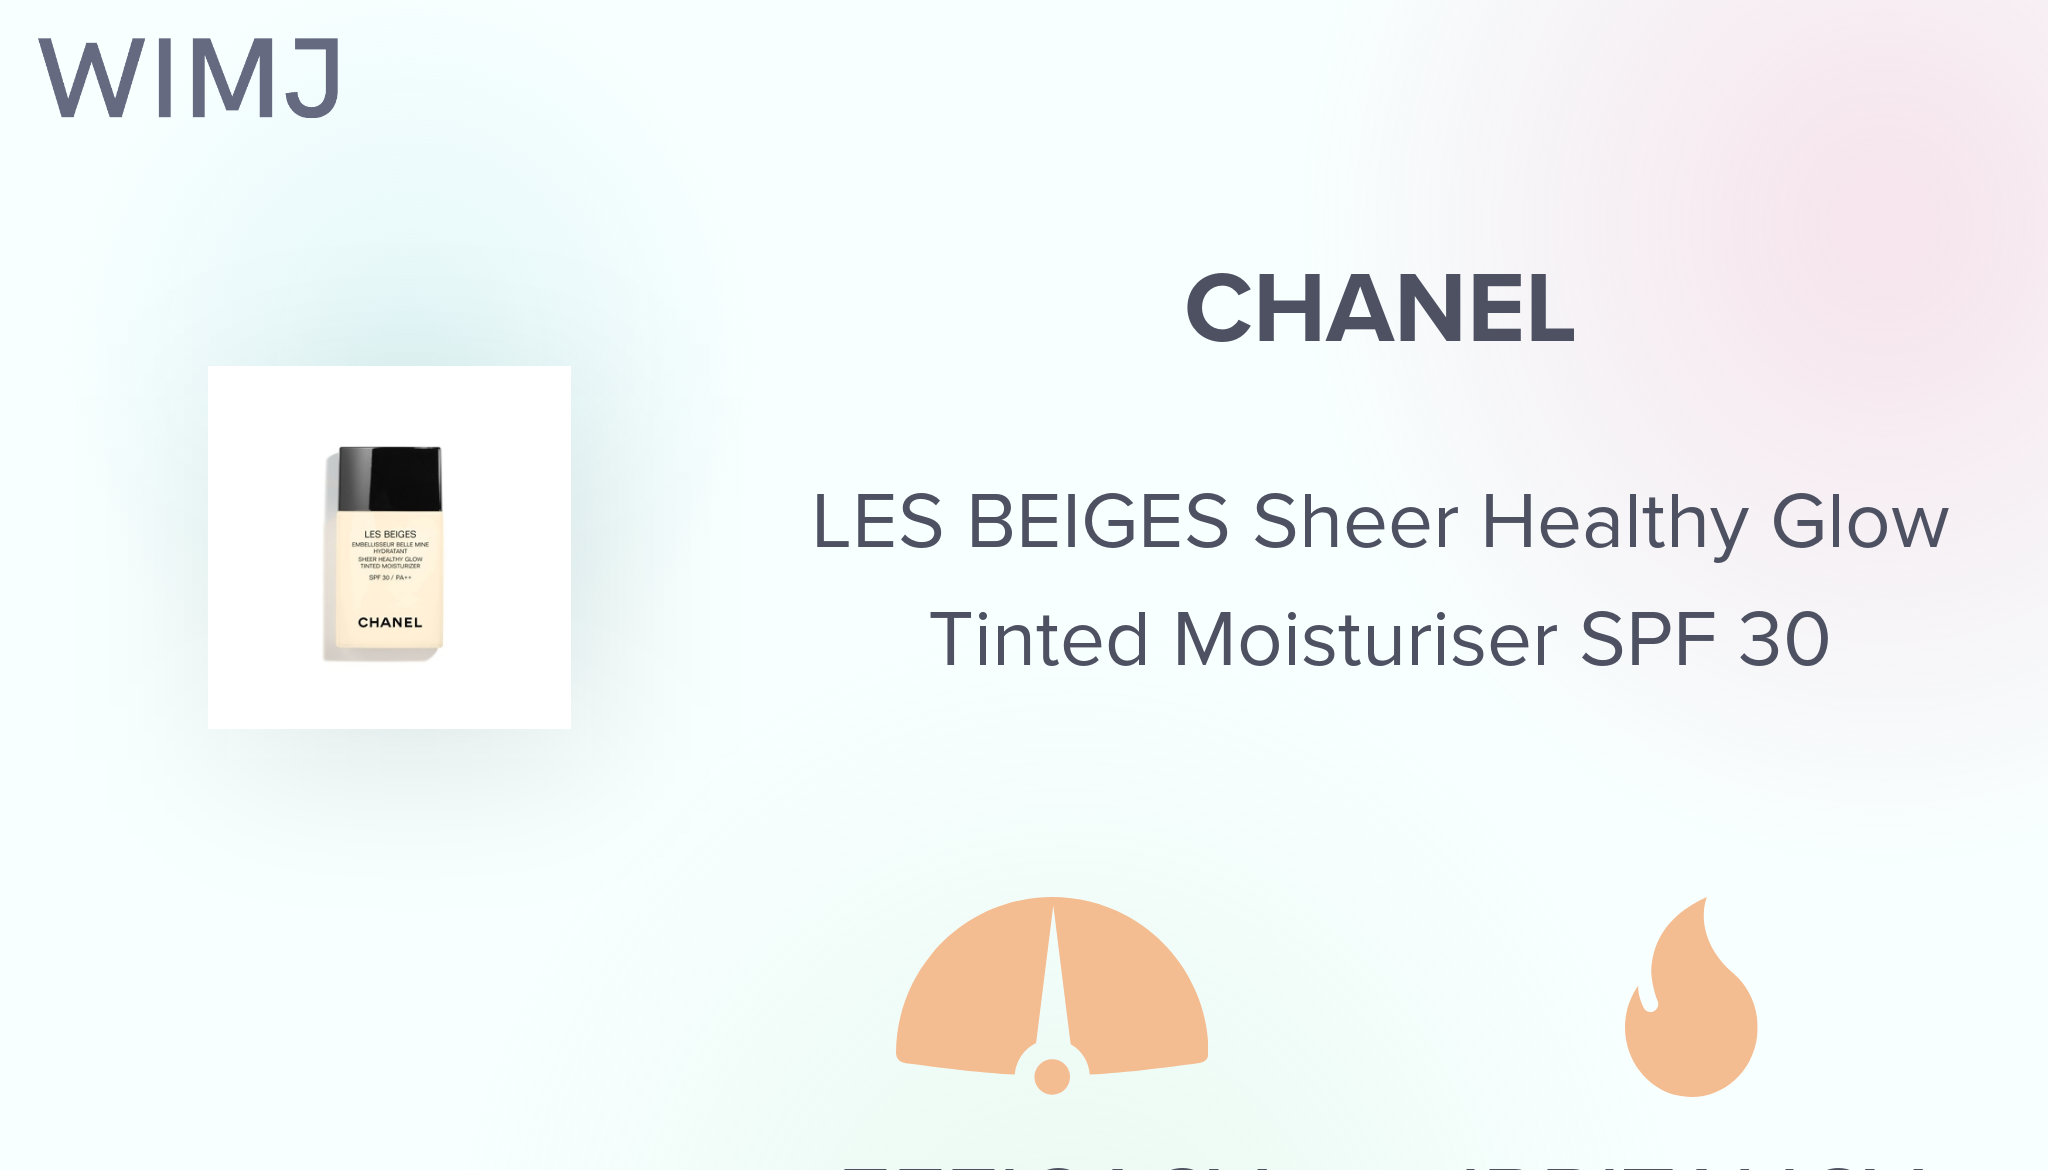 Review: CHANEL - LES BEIGES Sheer Healthy Glow Tinted Moisturiser SPF 30 -  WIMJ